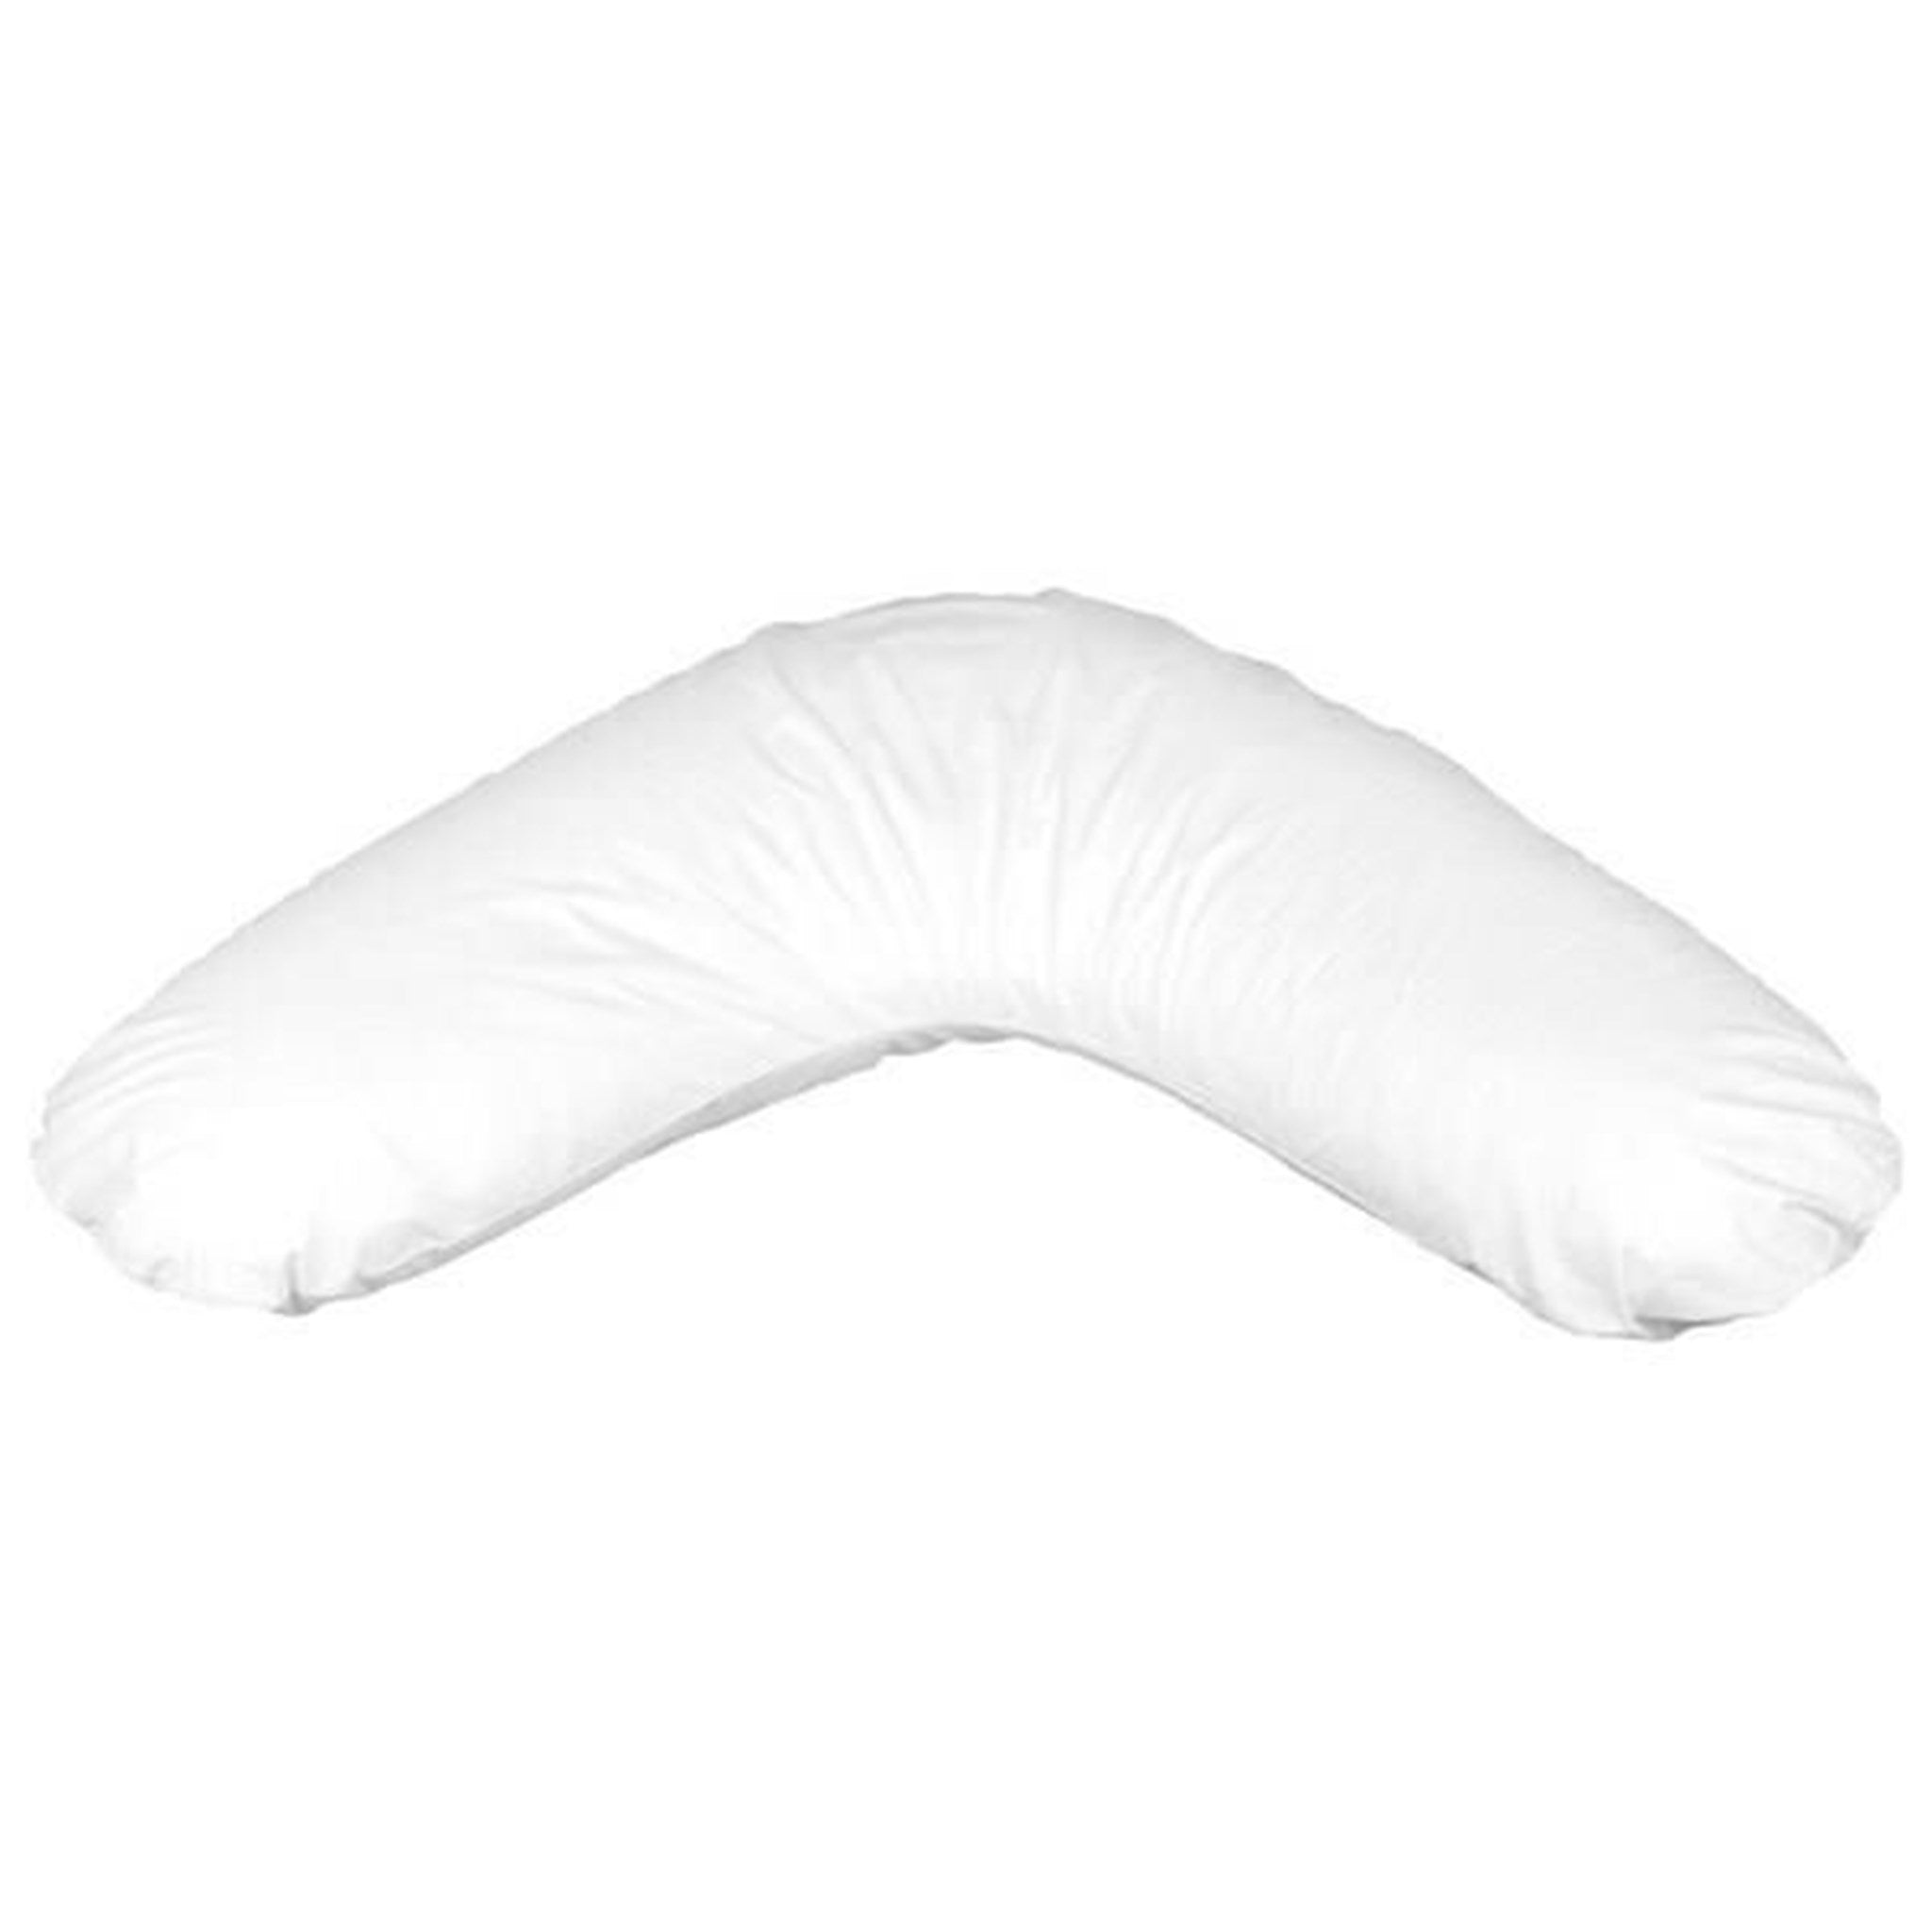 Fossflakes Nursing Pillow (with pillow cover)